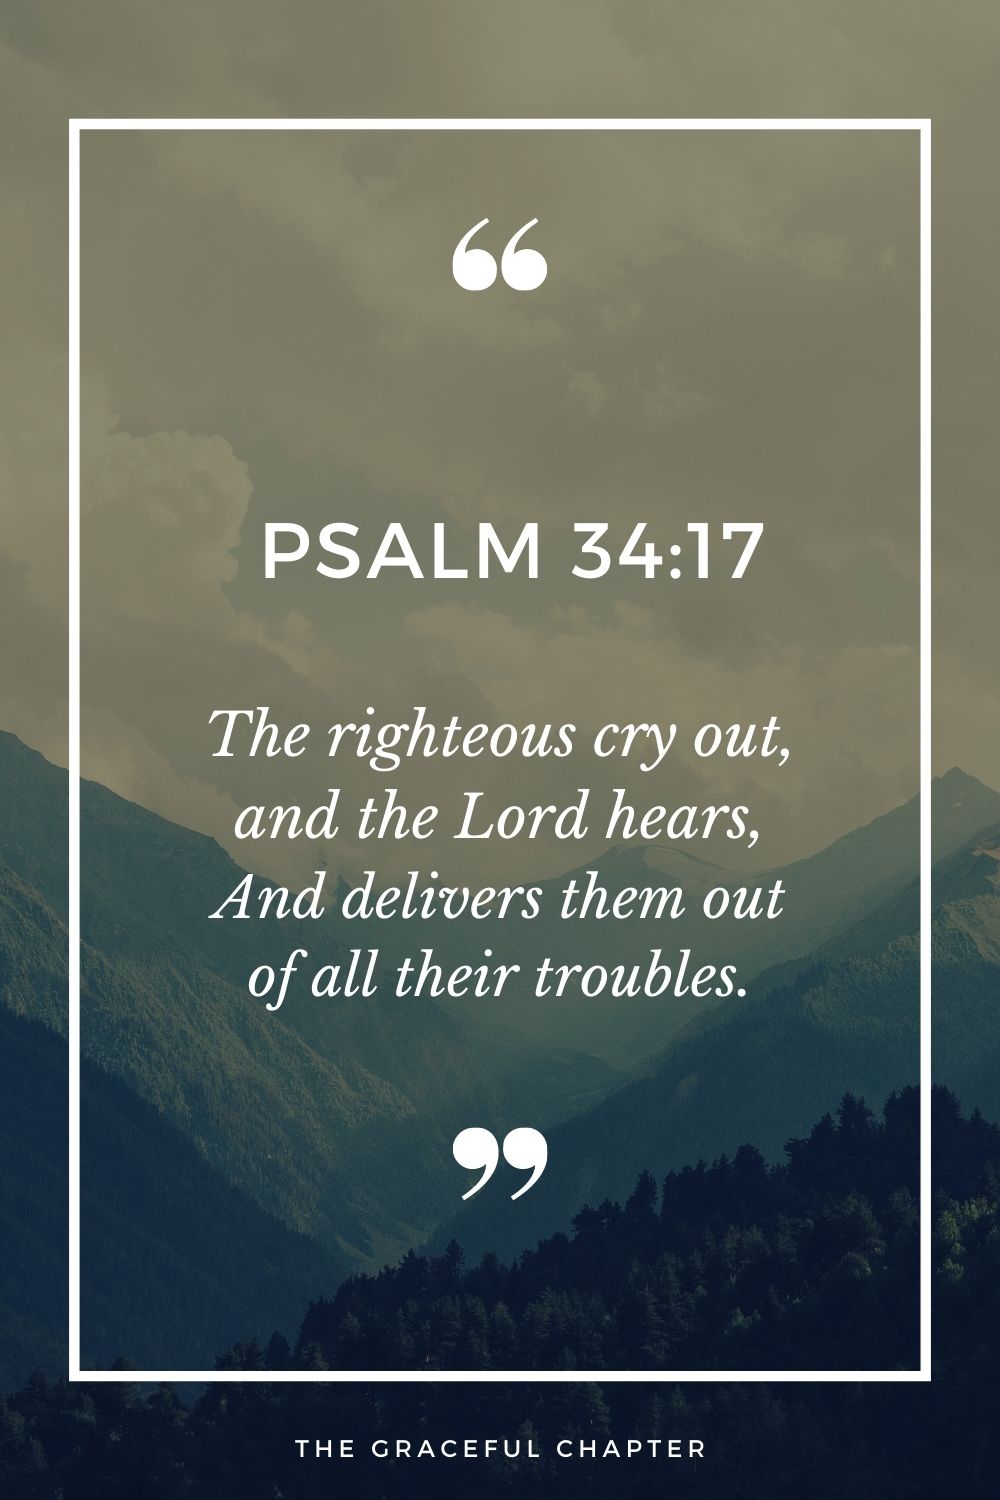 The righteous cry out, and the Lord hears, And delivers them out of all their troubles.  Psalm 34:17